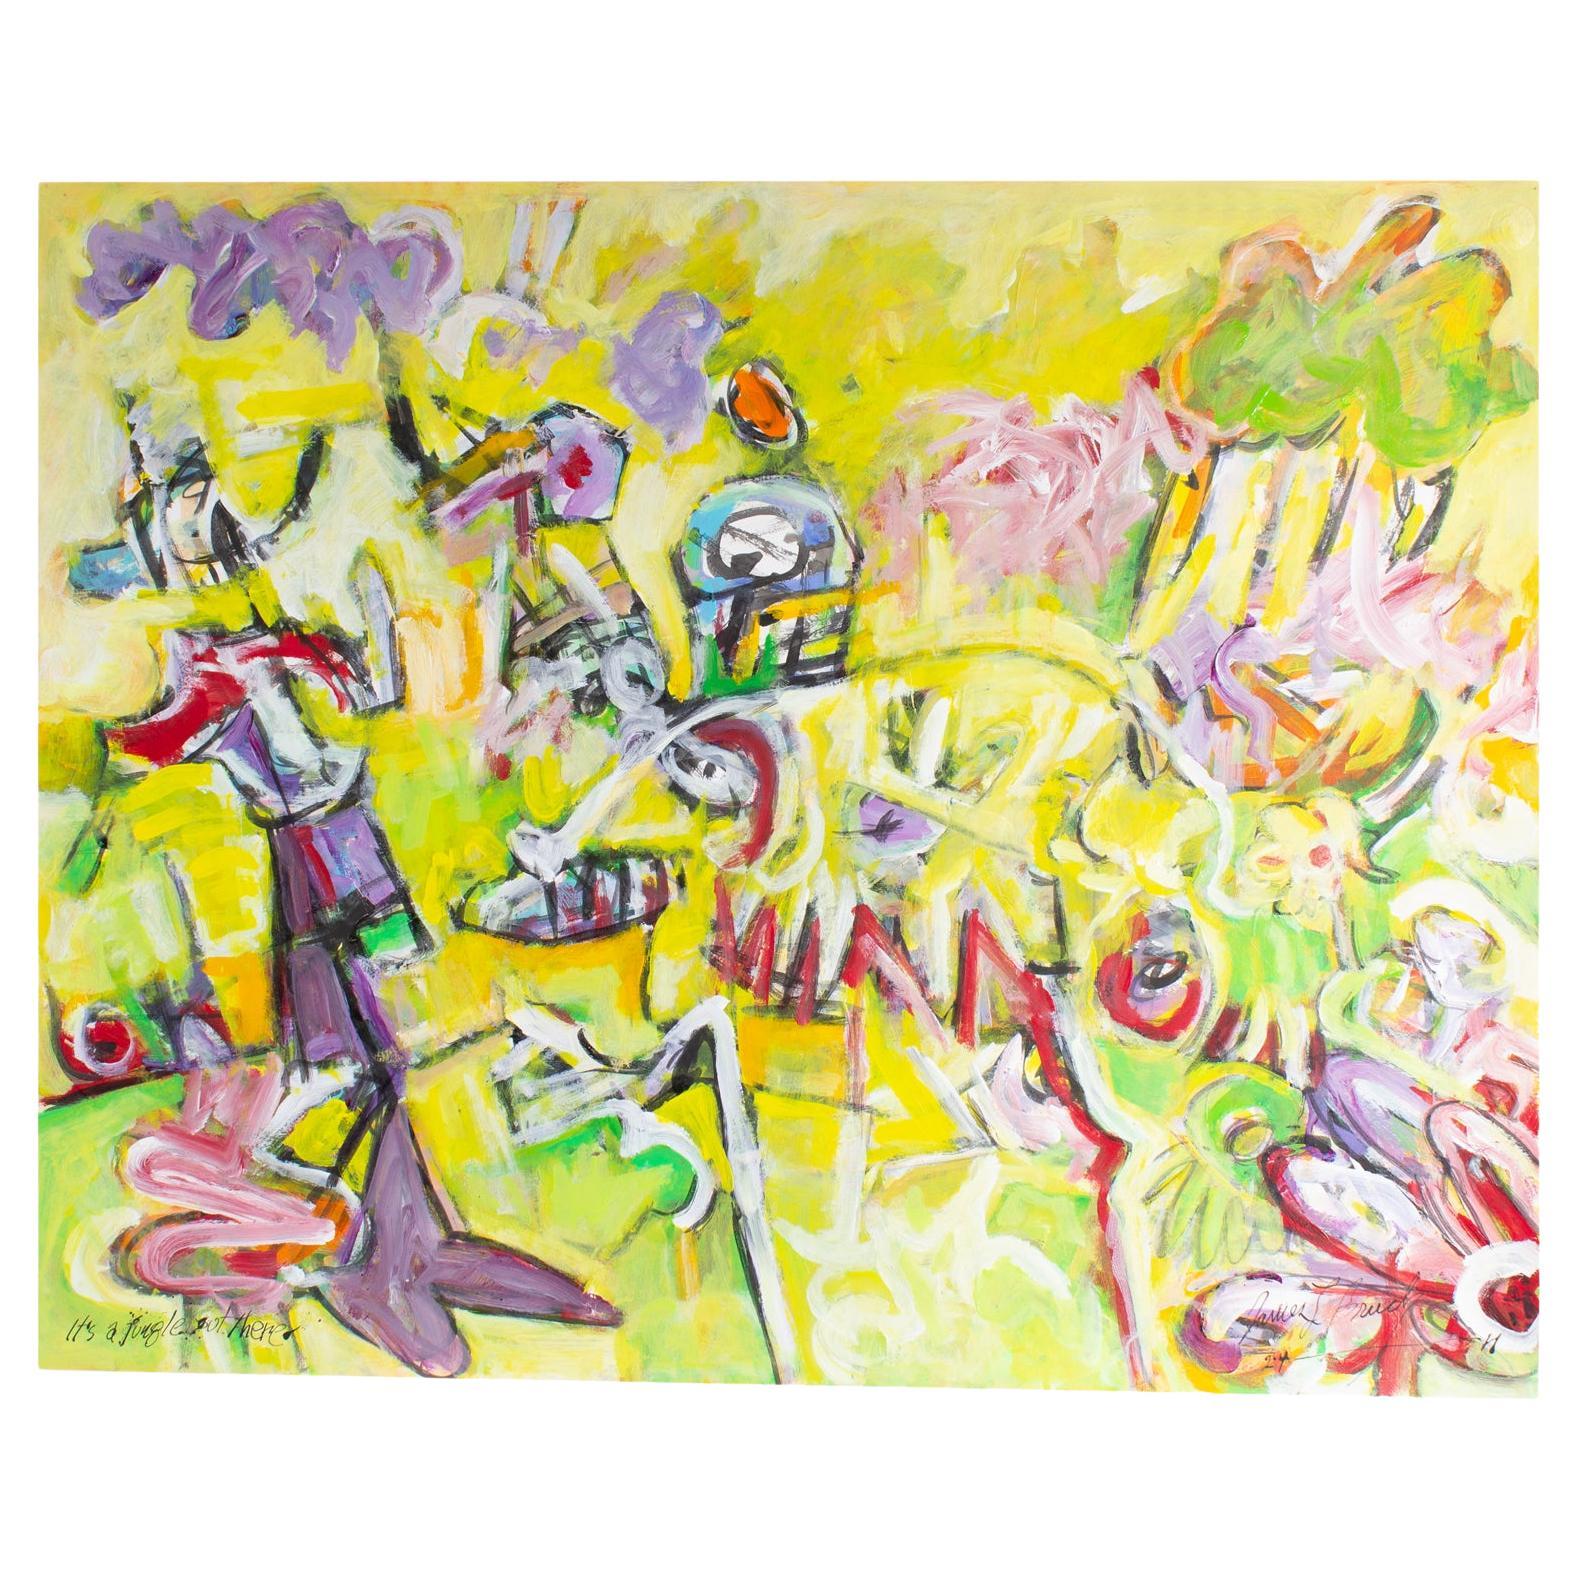 James L. Bruch Signed 2011 “It’s a Jungle Out There” Mixed Media Painting For Sale